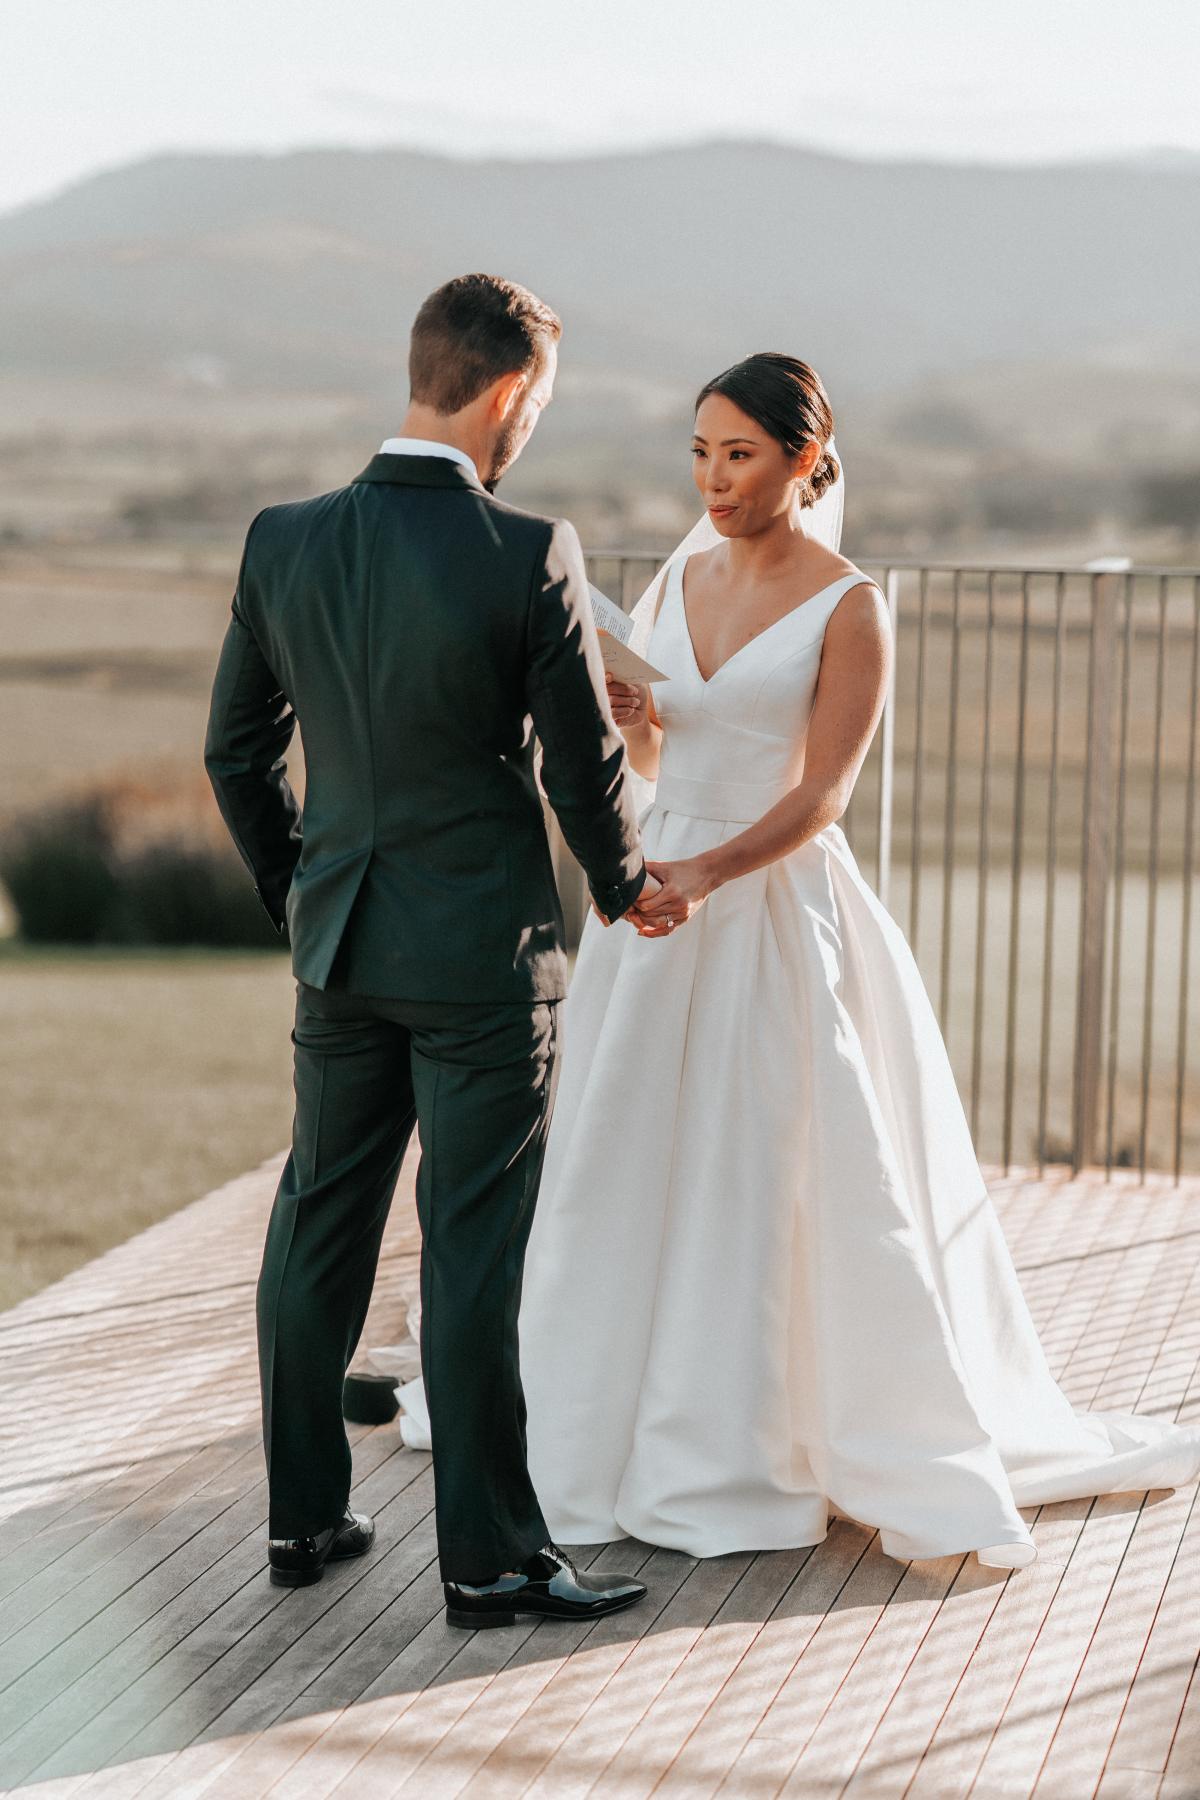 KWH real bride Rebecca takes as breath as she reads her vows to her husband. She wears the classic Leonie Melanie gown, a V-neck modern a-line wedding dress.